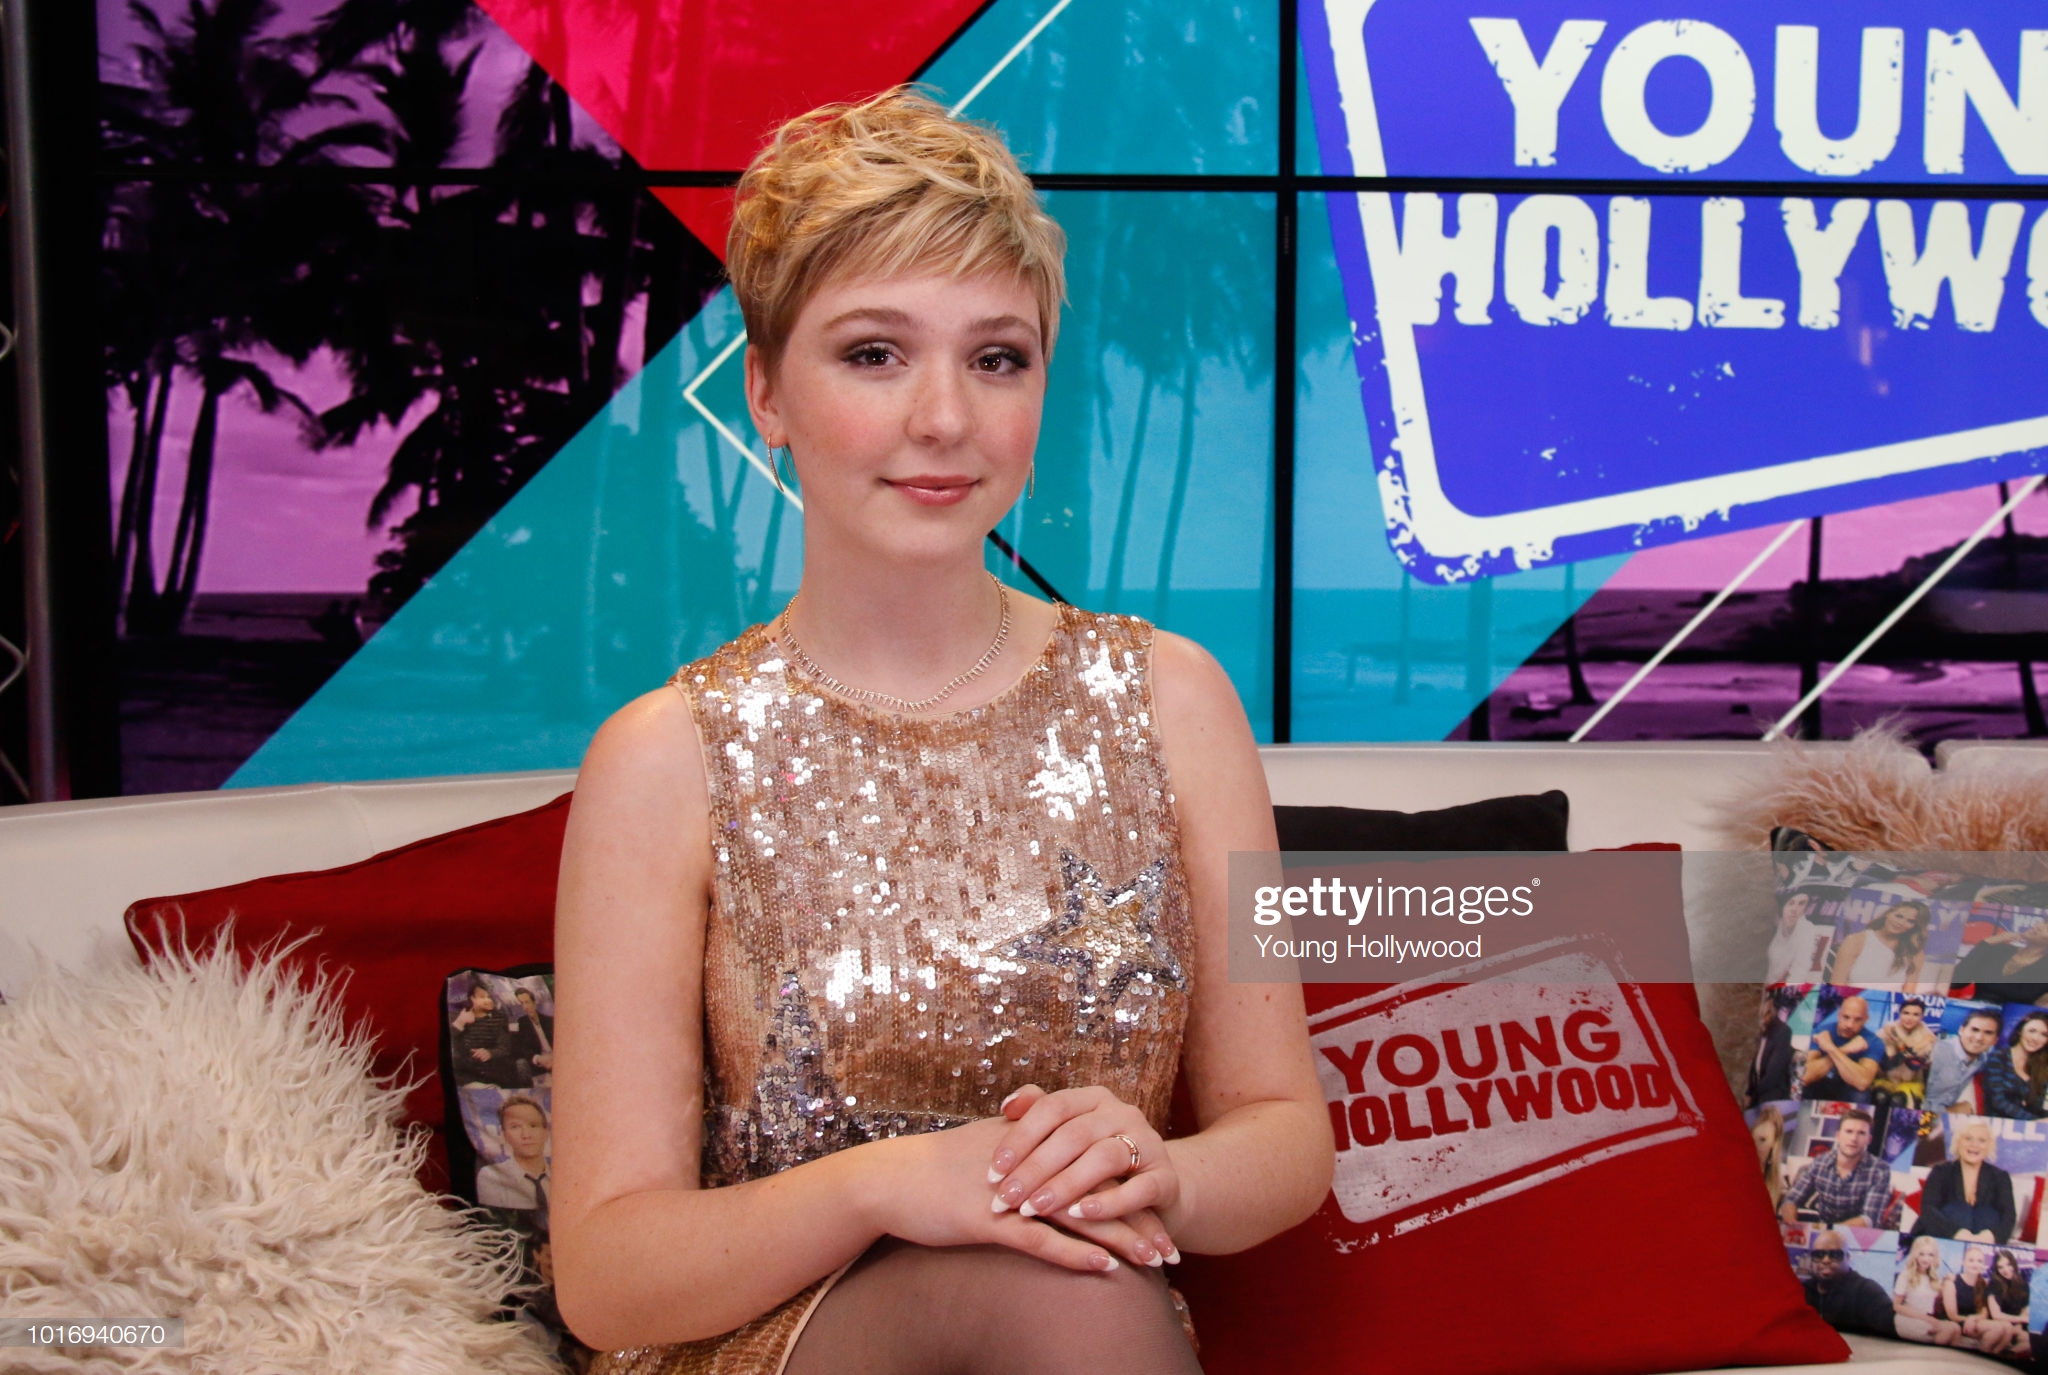 LOS ANGELES, CA - August 10: (EXCLUSIVE COVERAGE) Cozi Zuehlsdorff visits the Young Hollywood Studio on August 10, 2018 in Los Angeles, California. (Photo by Mary Clavering/Young Hollywood/Getty Images)